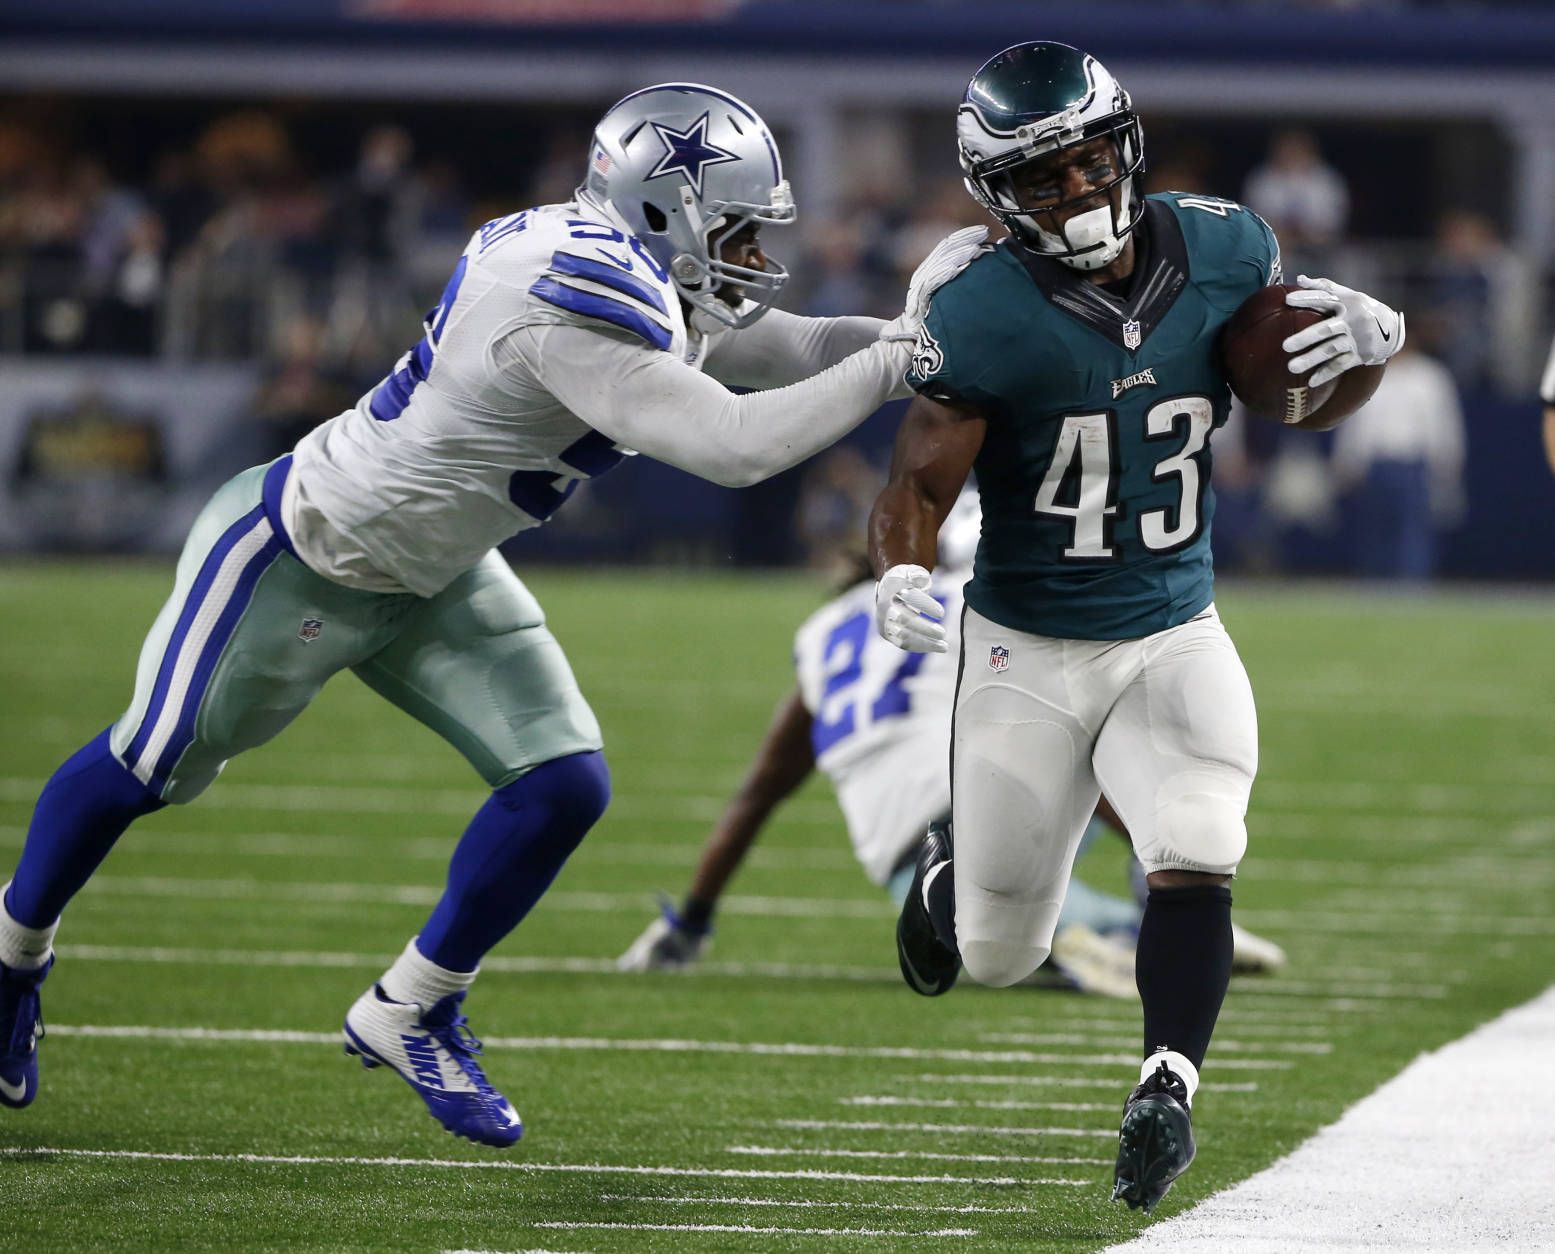 Dallas Cowboys linebacker Justin Durant (56) pushes Philadelphia Eagles running back Darren Sproles (43) out of bounds after a long run in the first half of an NFL football game, Sunday, Oct. 30, 2016, in Arlington, Texas. (AP Photo/Ron Jenkins)